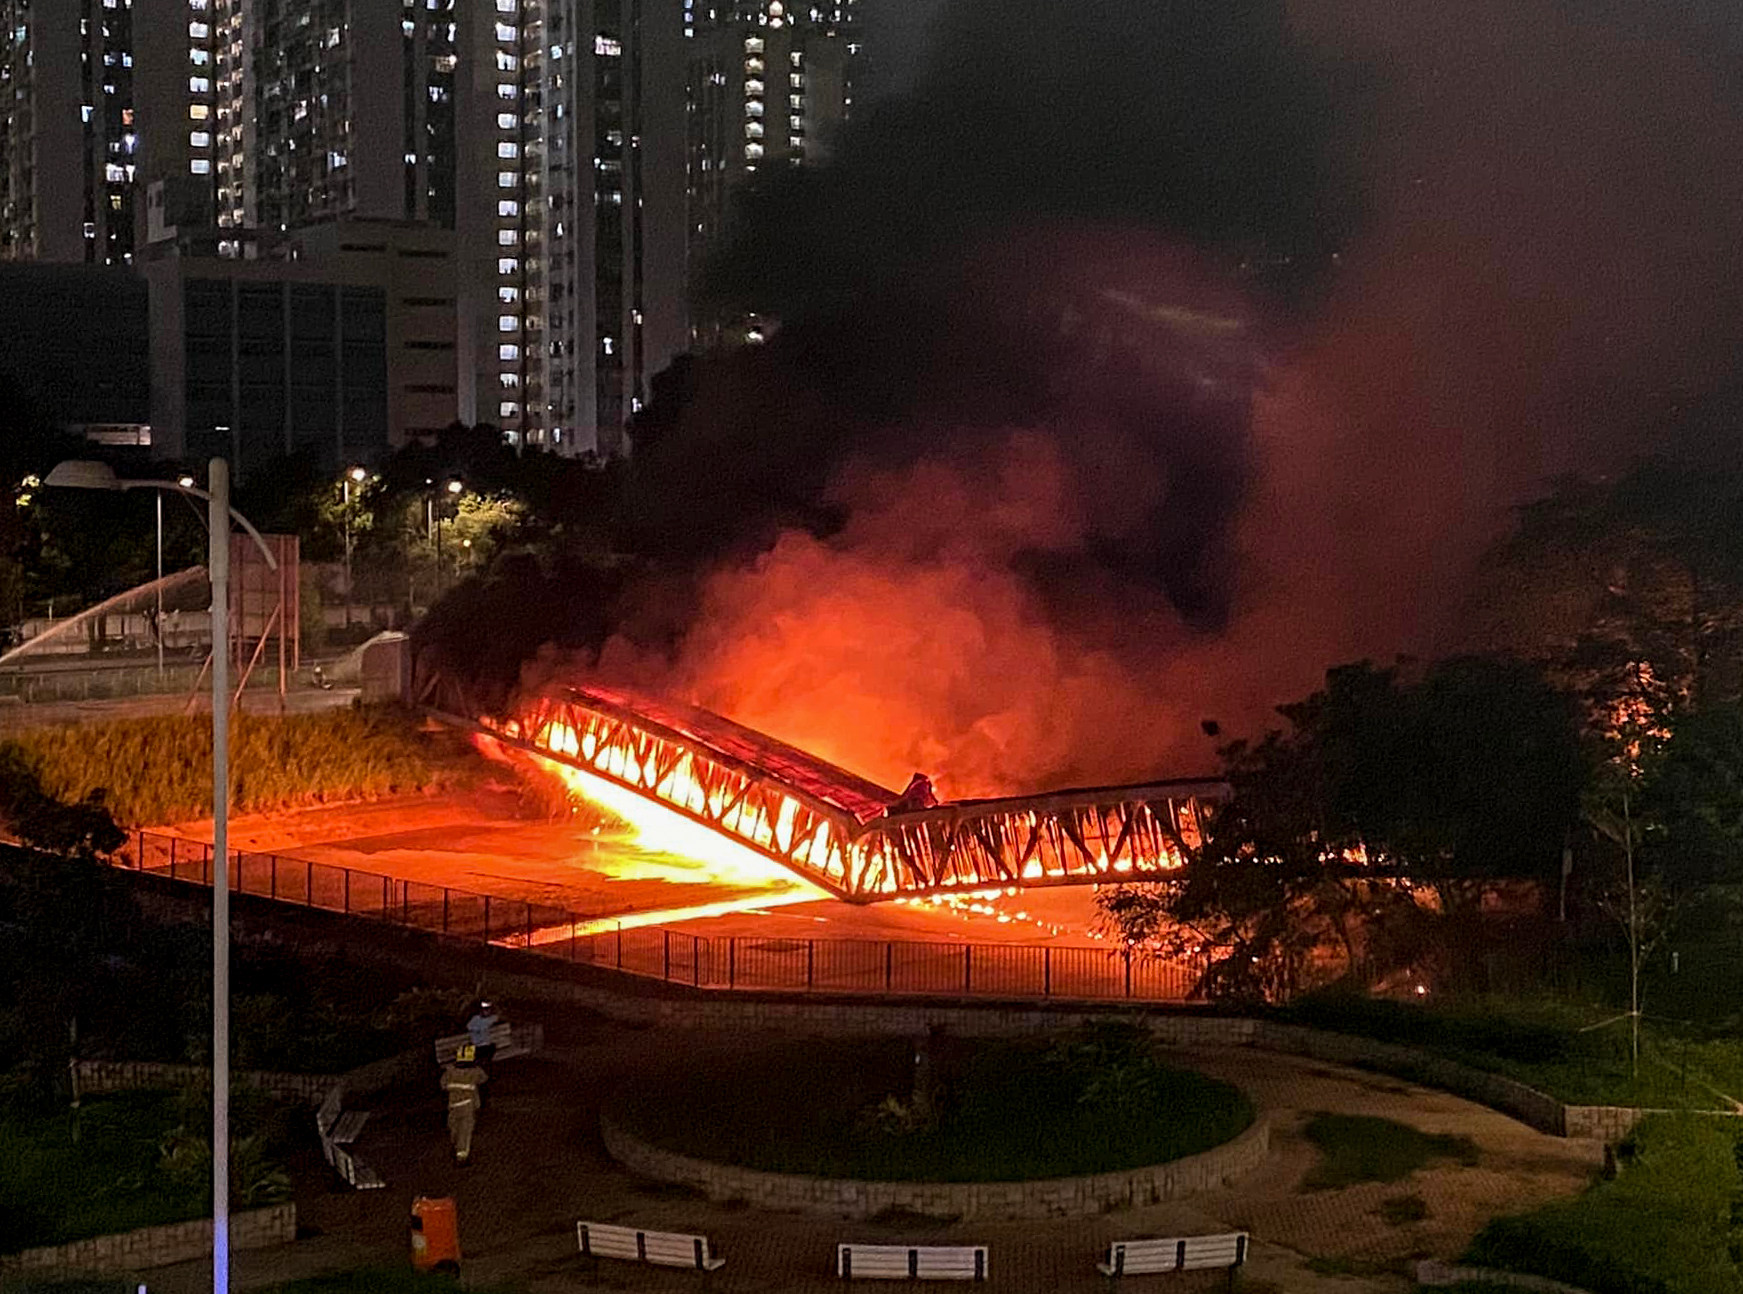 A cable bridge fire that cut off power to about 140,000 homes and disrupted rail services in June. Photo: Facebook..